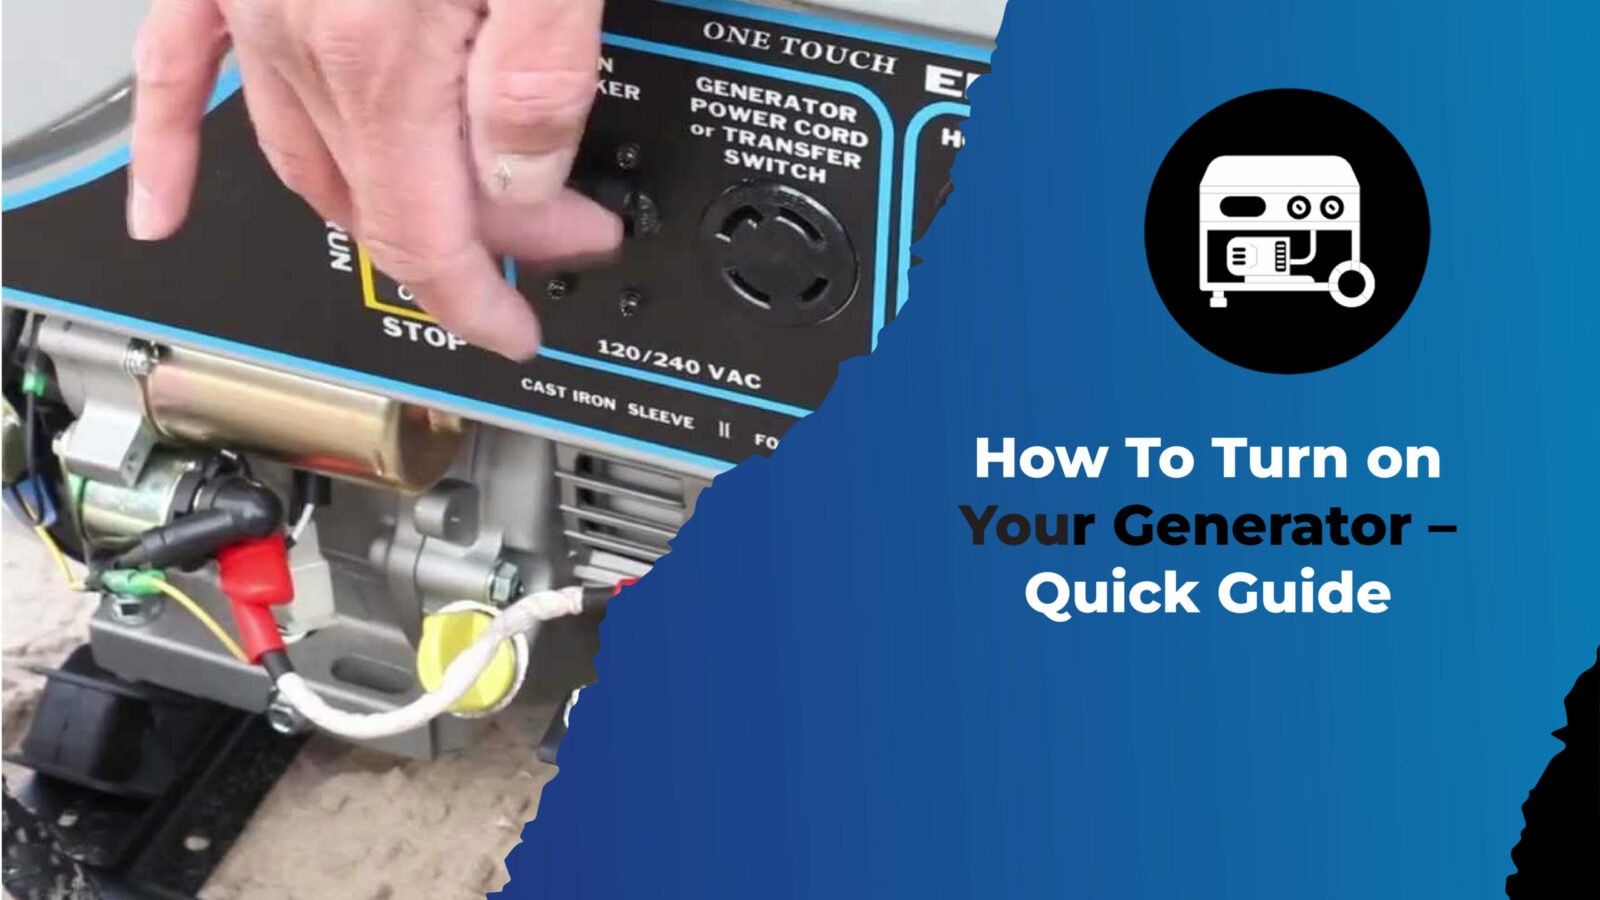 How To Turn on Your Generator – Quick Guide